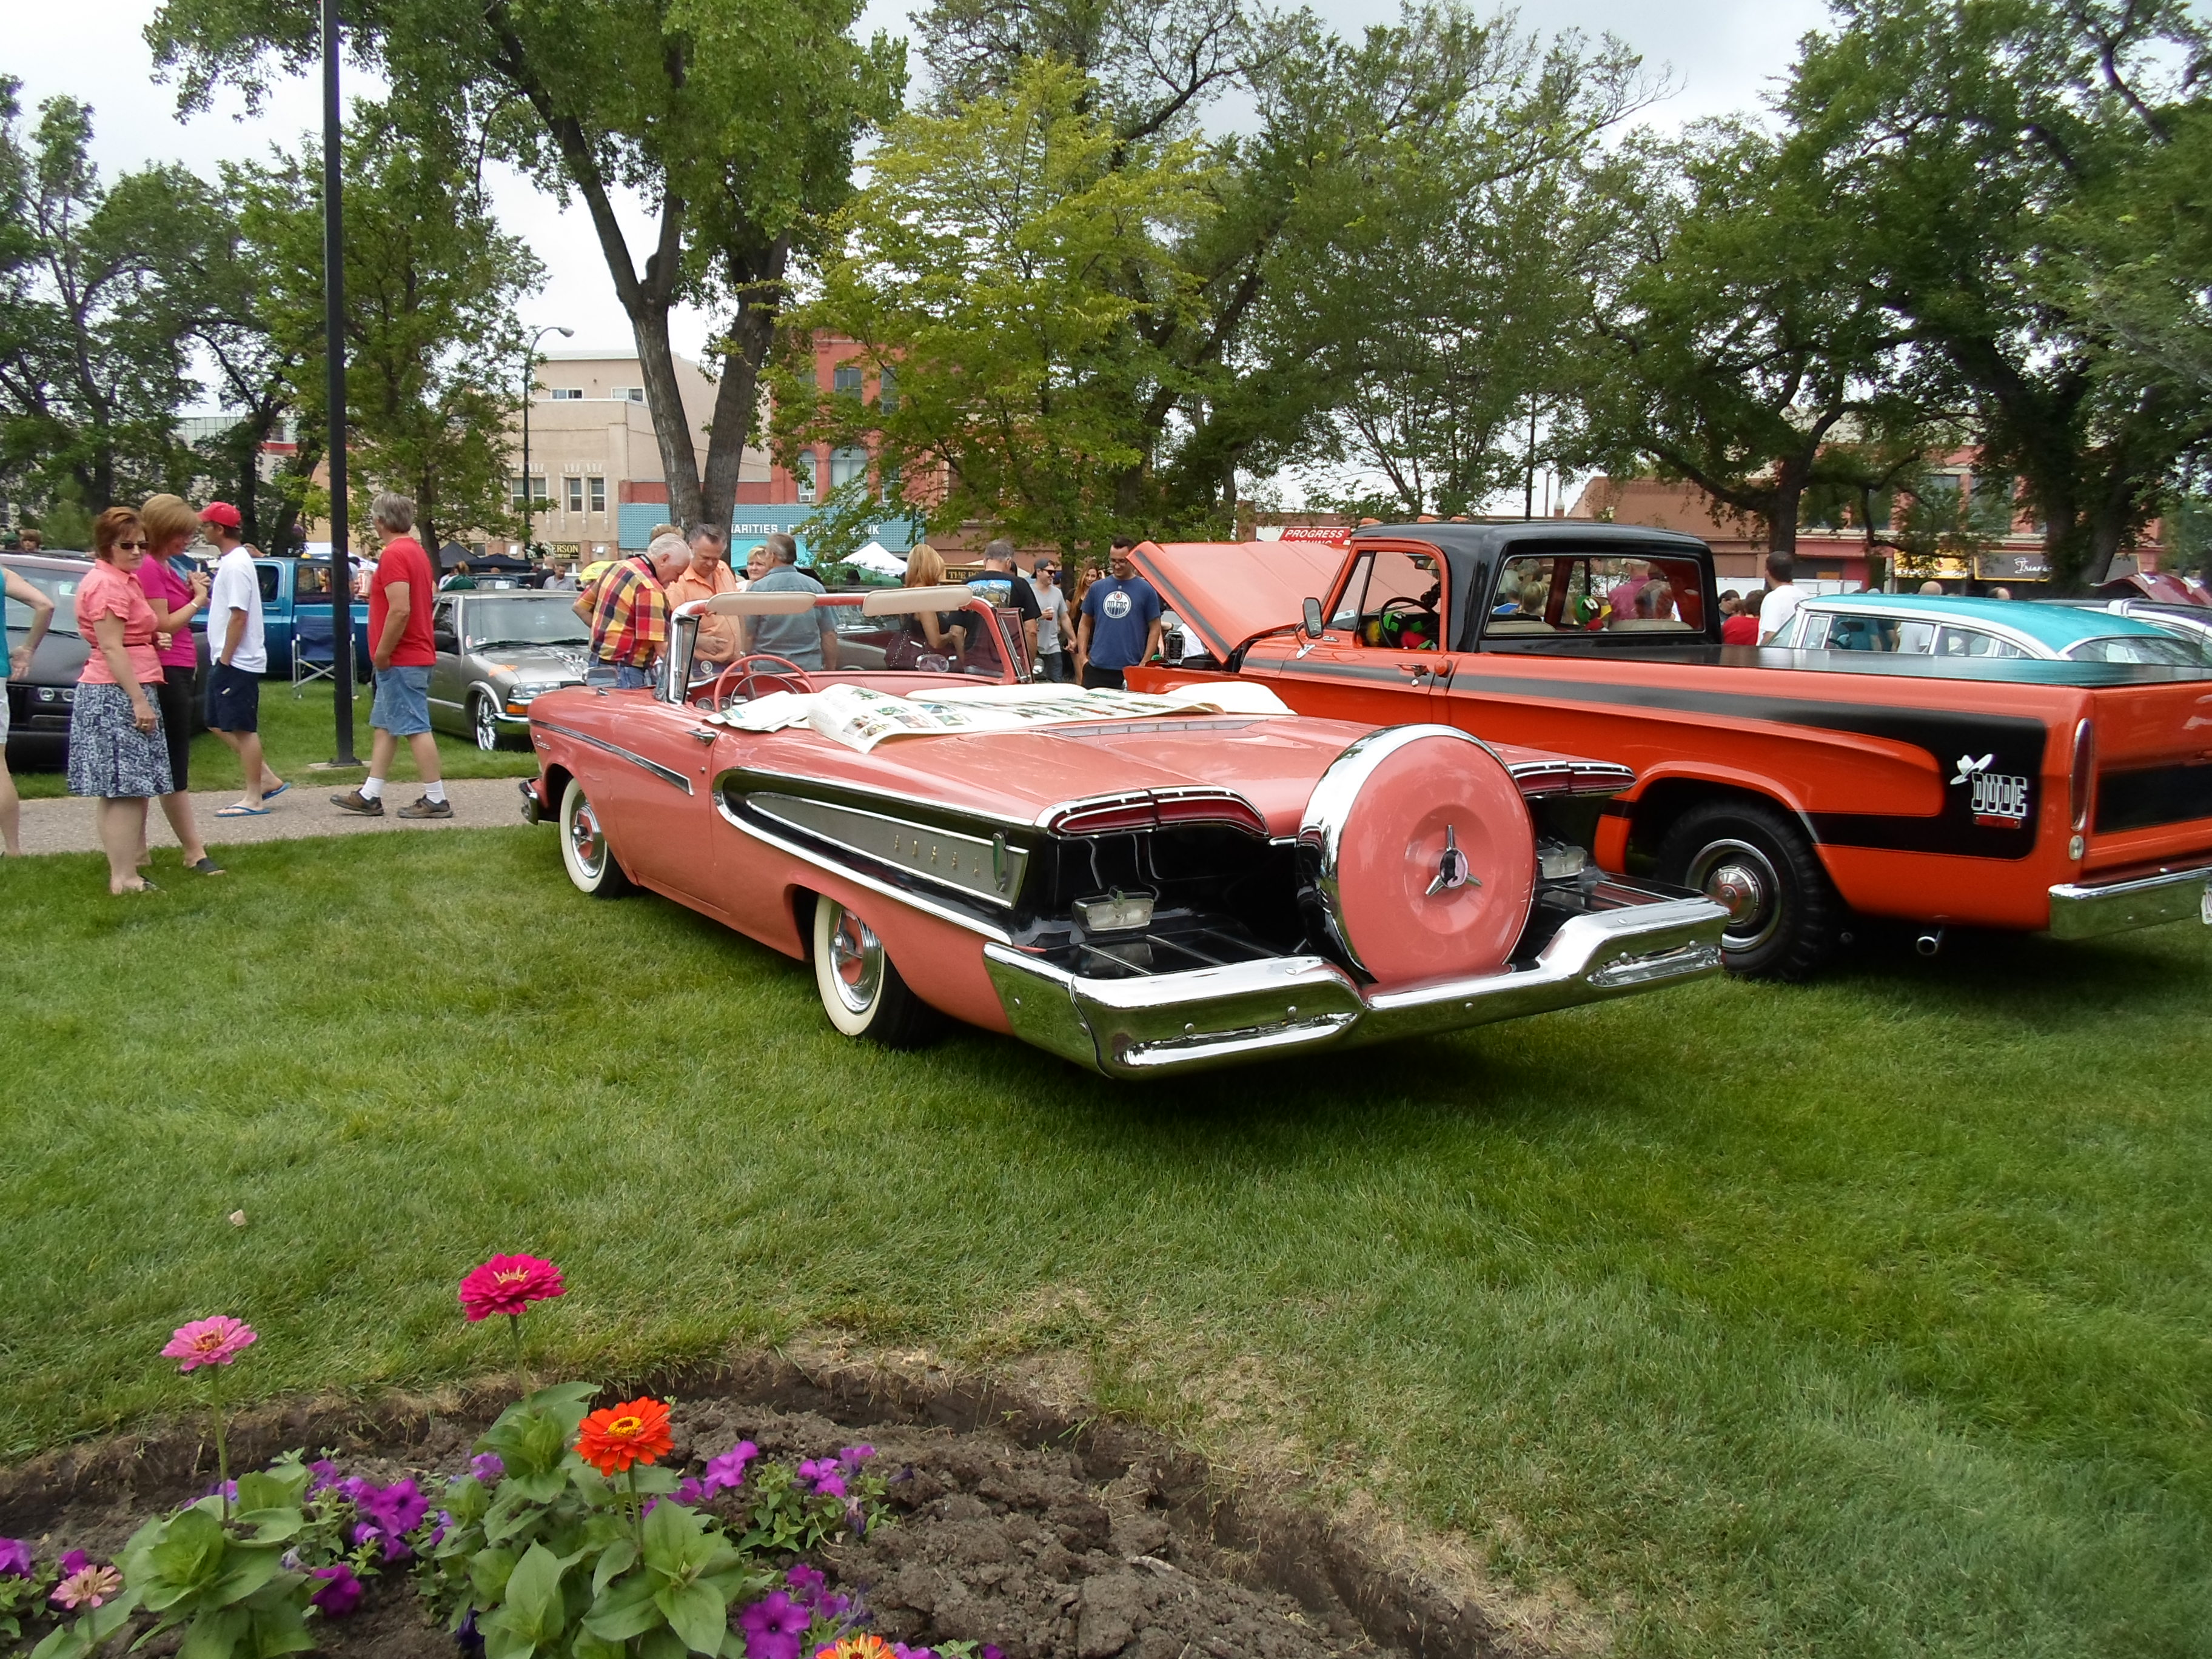 1958 Edsel Pacer Convertible | Flickr - Photo Sharing!